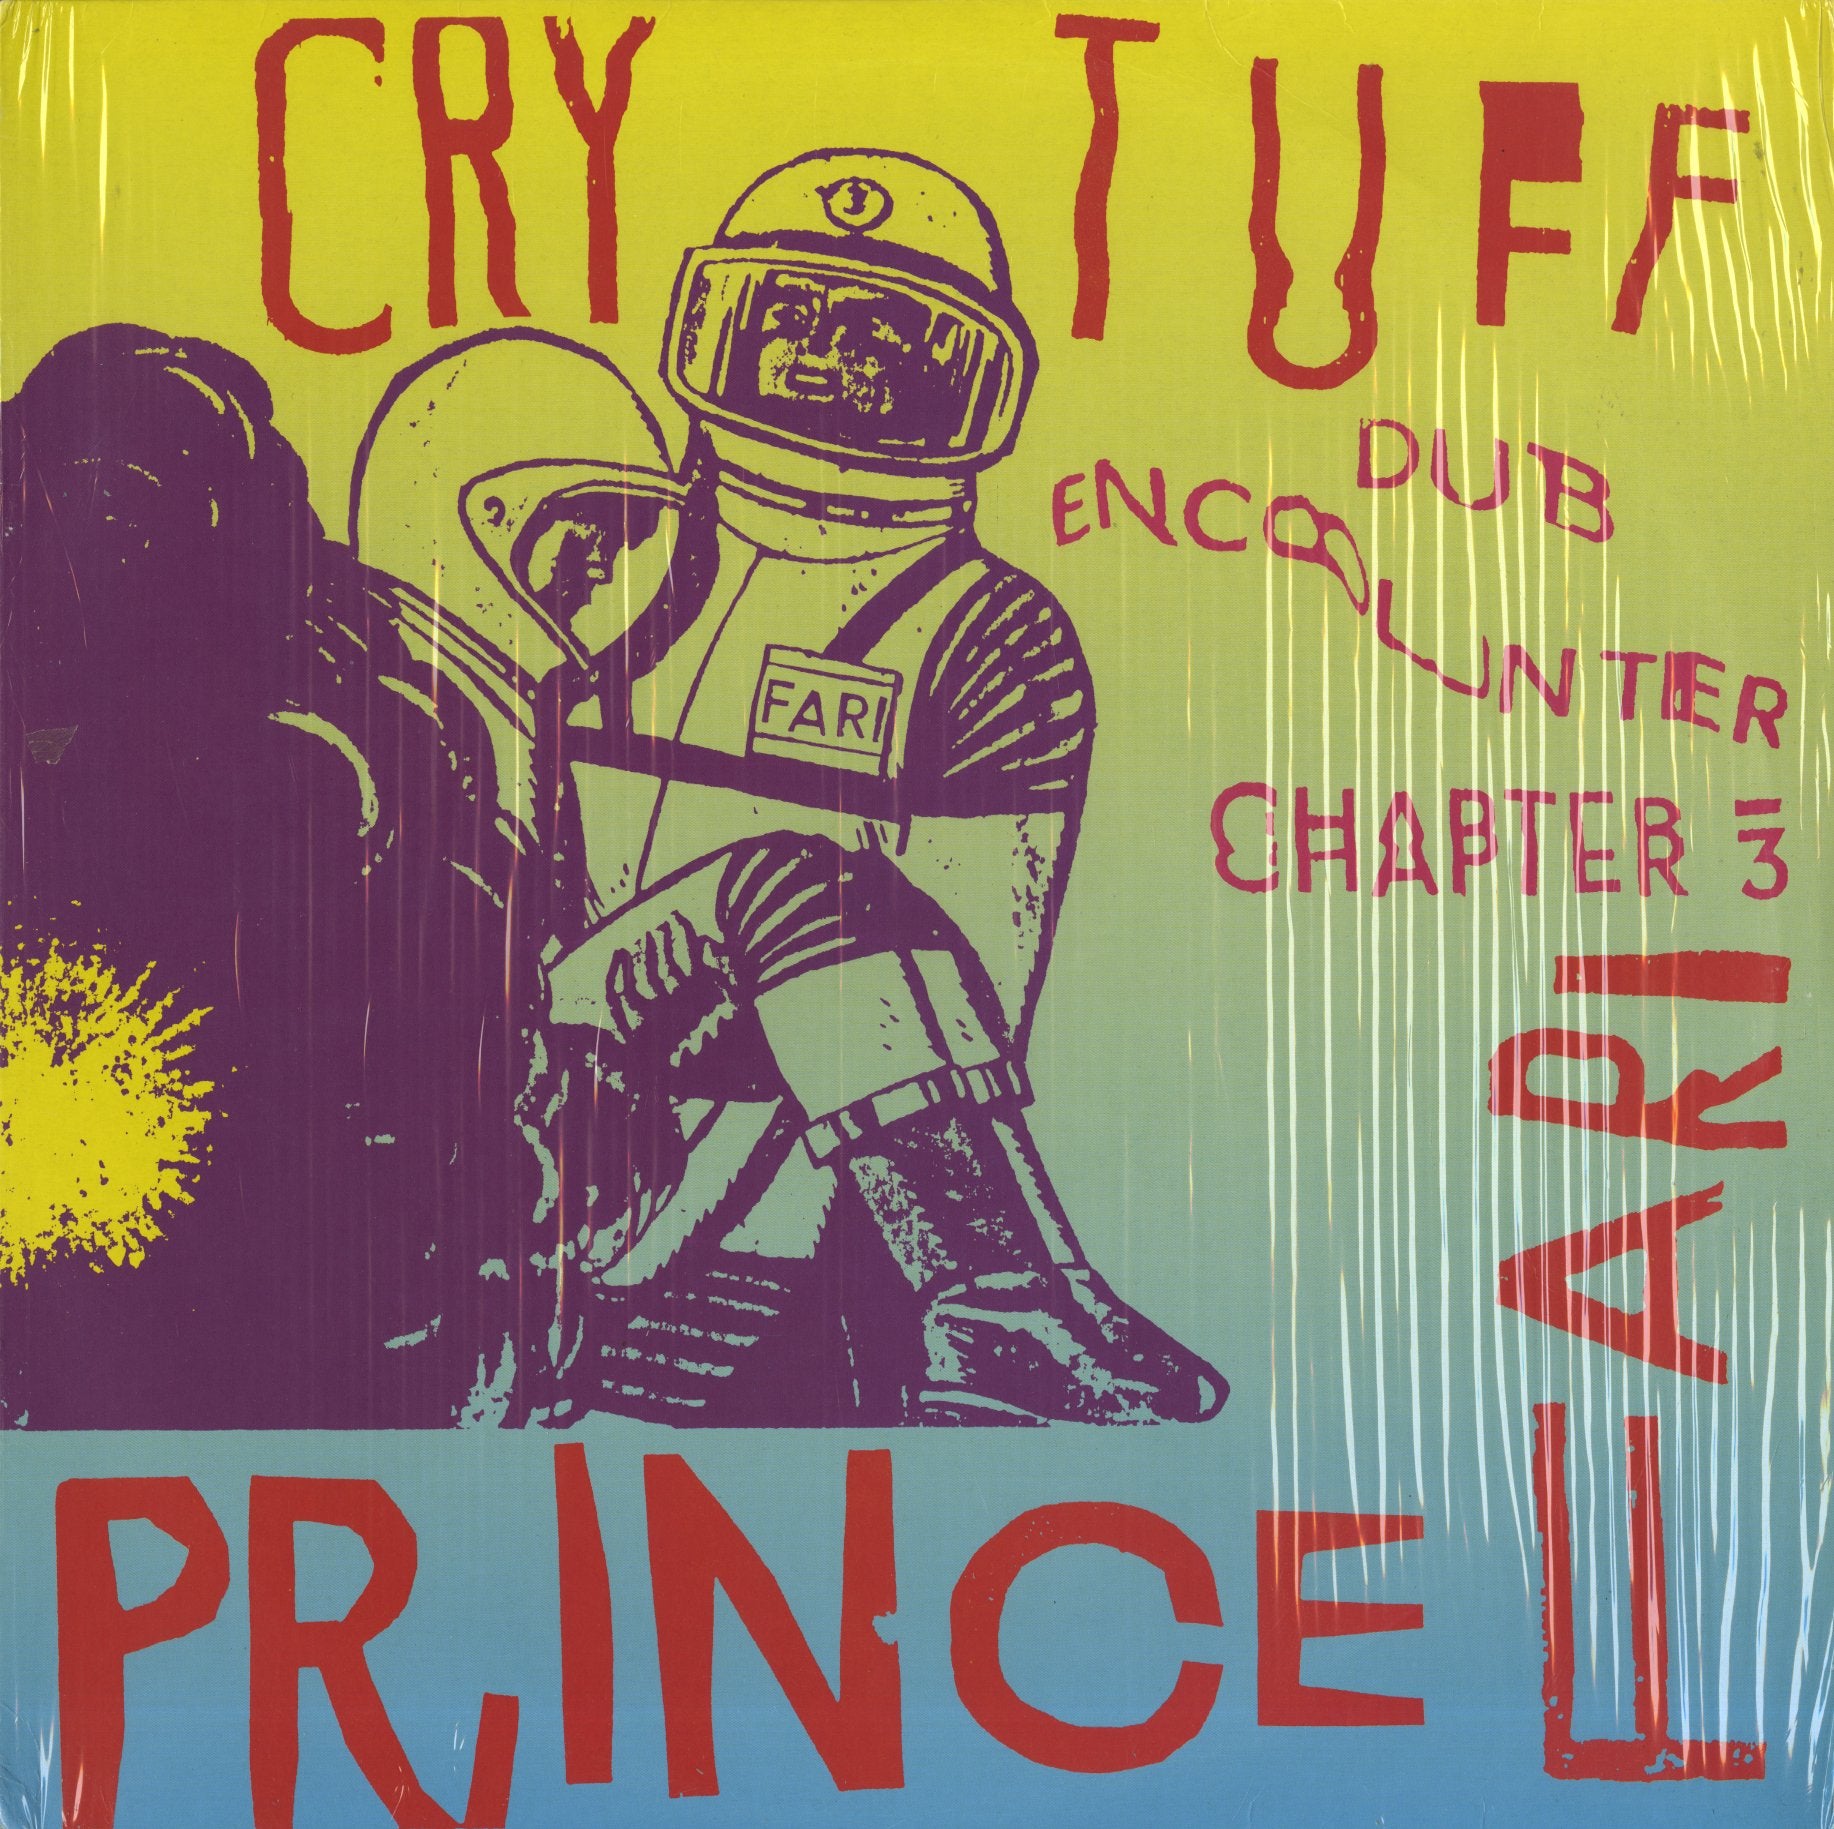 Cry　–　Arabs　Chapt　Prince　VOXMUSIC　Far-I　WEBSHOP　Dub　And　The　Tuff　プリンス・ファーライ　Encounter